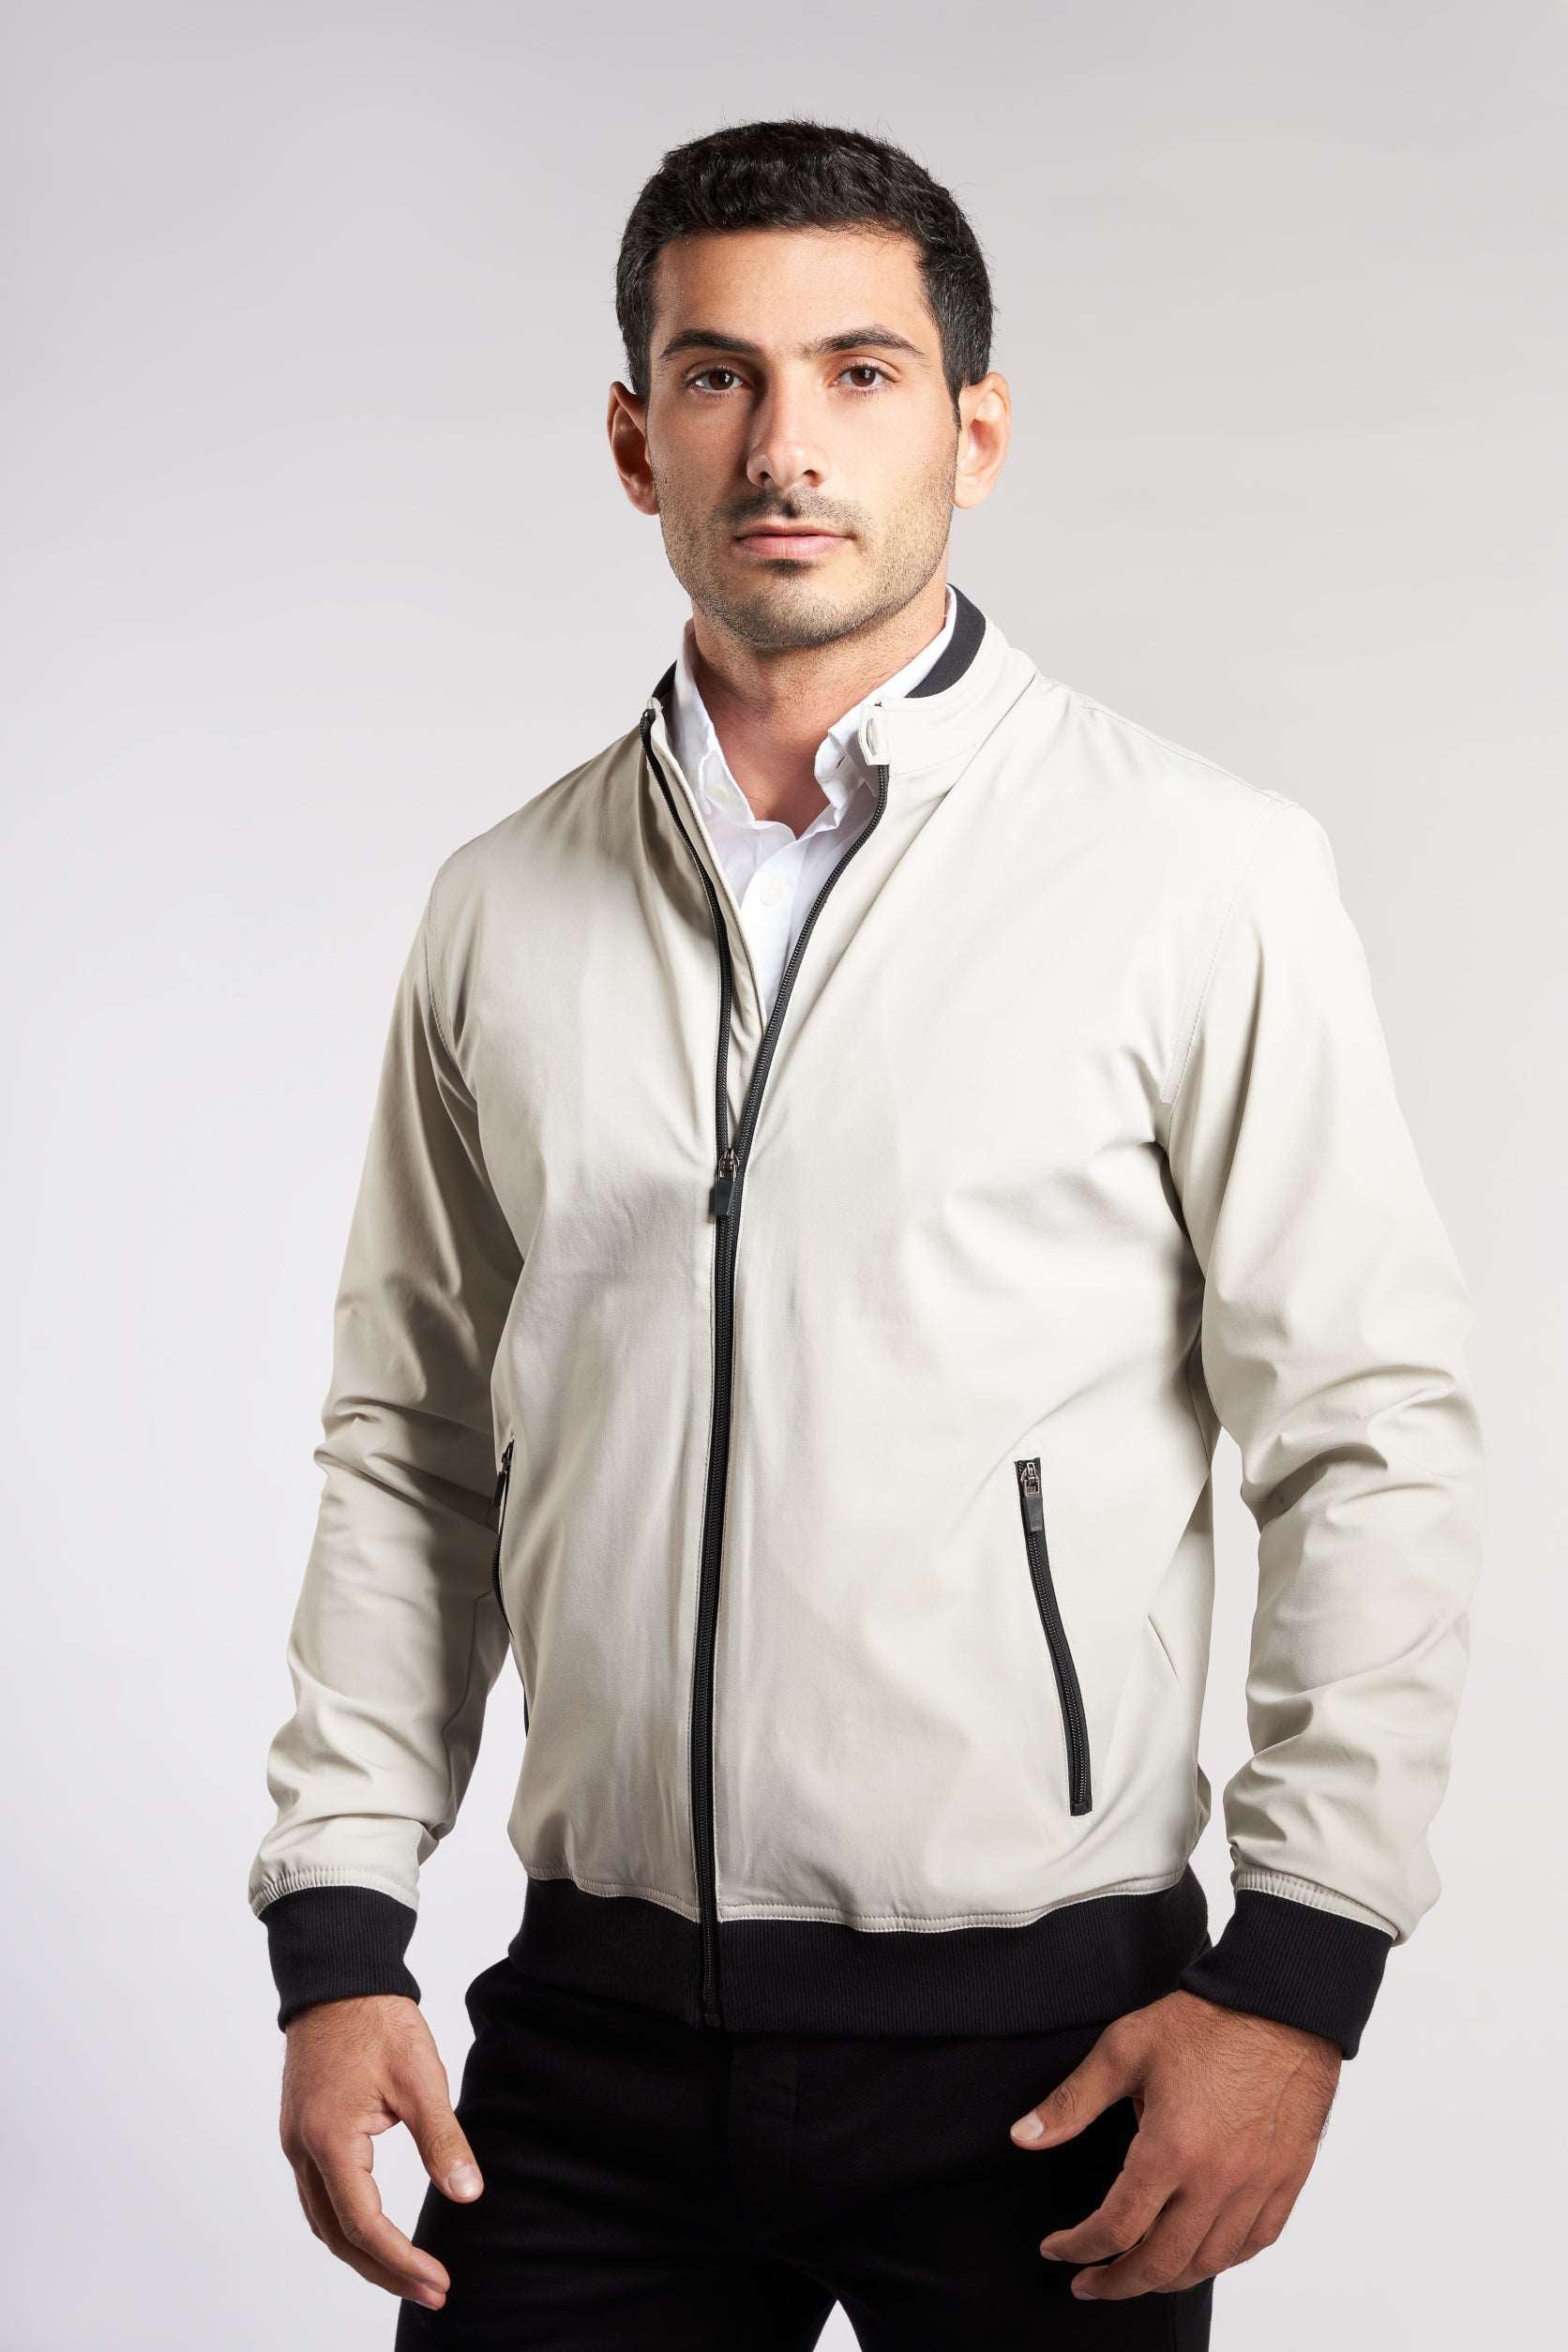 Grey Chanee Water Proof 4 Way Jacket With Black Cuffs